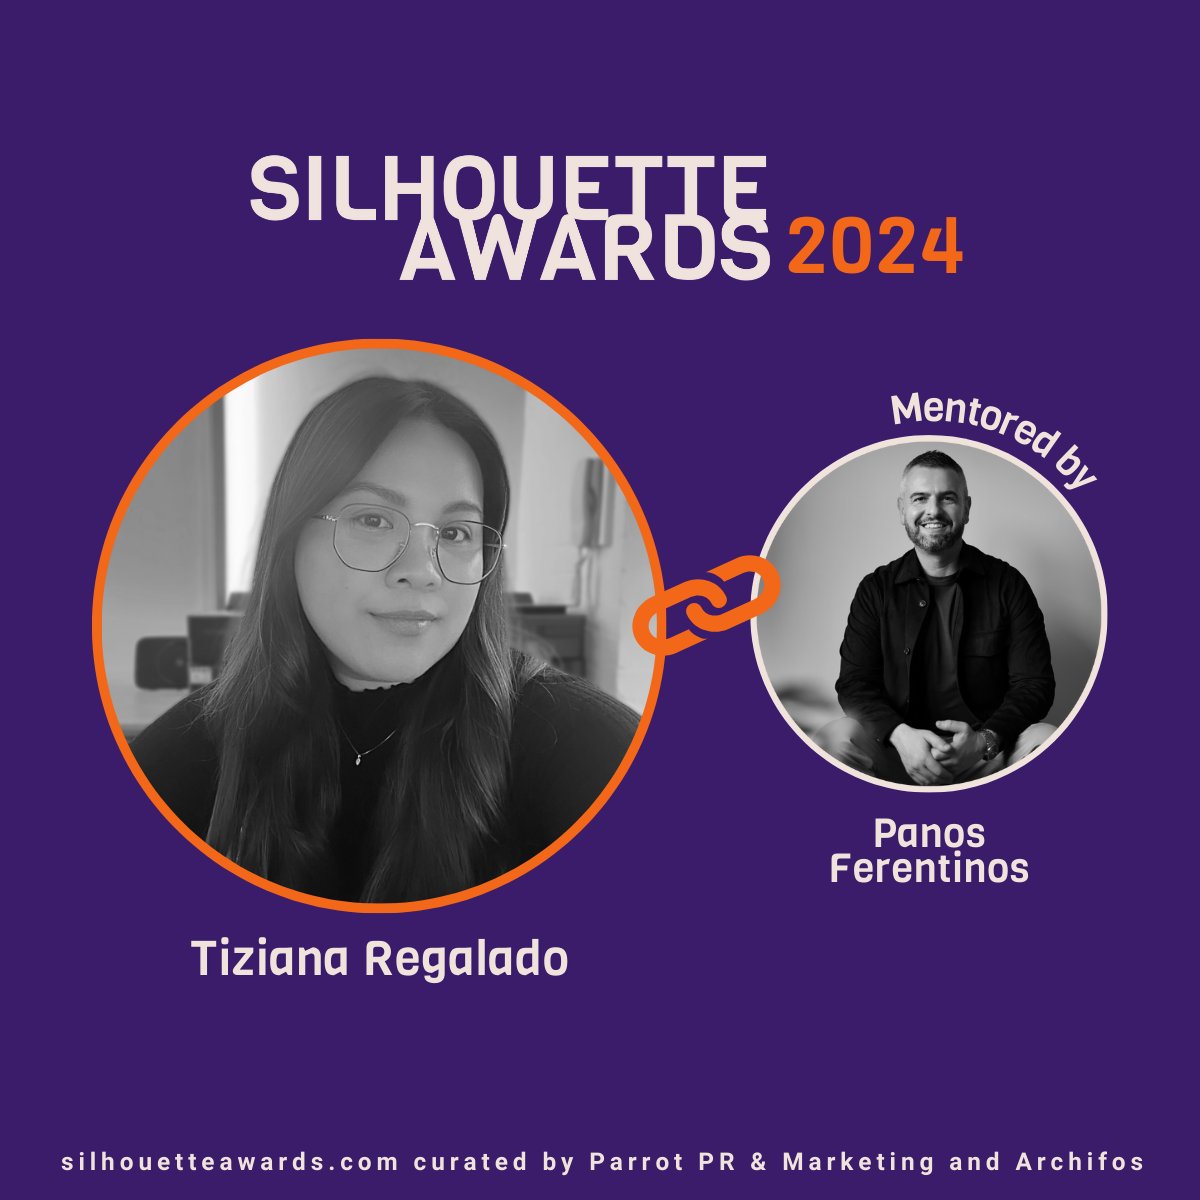 Associate Lighting Designer Panos Ferentinos is a mentor for the 2024 International Silhouette Awards. The mentorship program winners have now been announced. A huge congratulations to Tiziana Regalado who will be mentored by Panos. 

qodaconsulting.com/?news=silhouet…

#lightingdesign